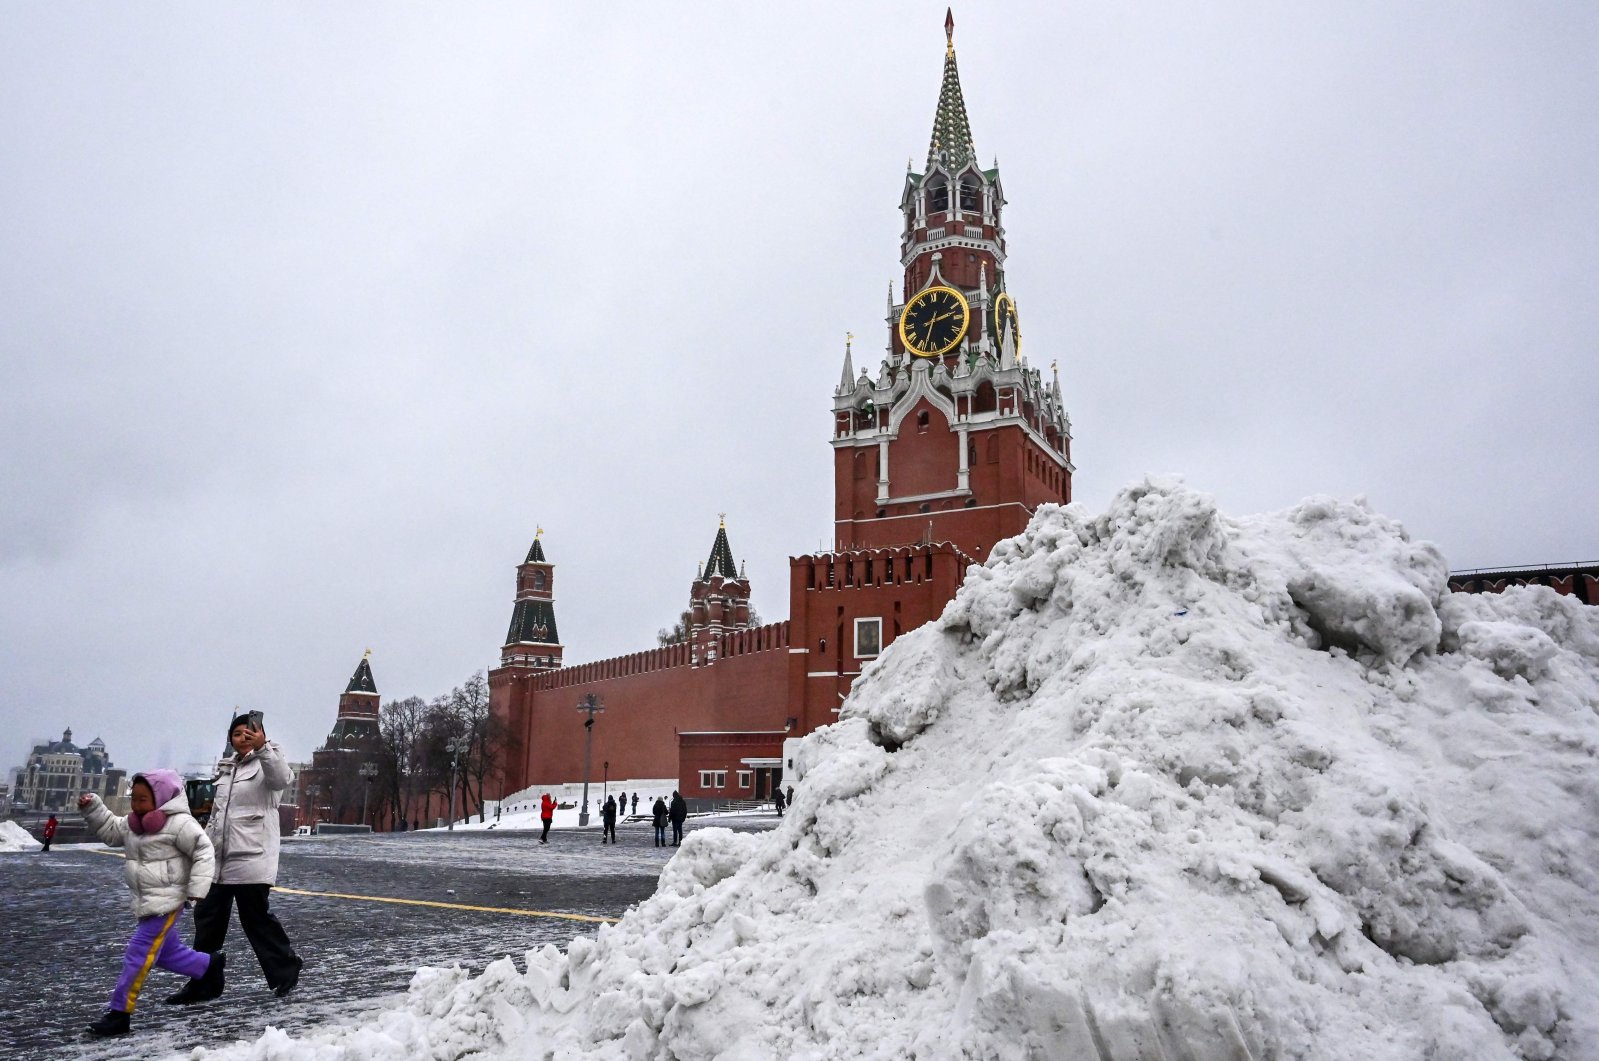 Children walk past a snow heap after a snowfall in front of the Spasskaya tower of the Kremlin, Moscow, Russia, Nov. 22, 2022. (AFP Photo)